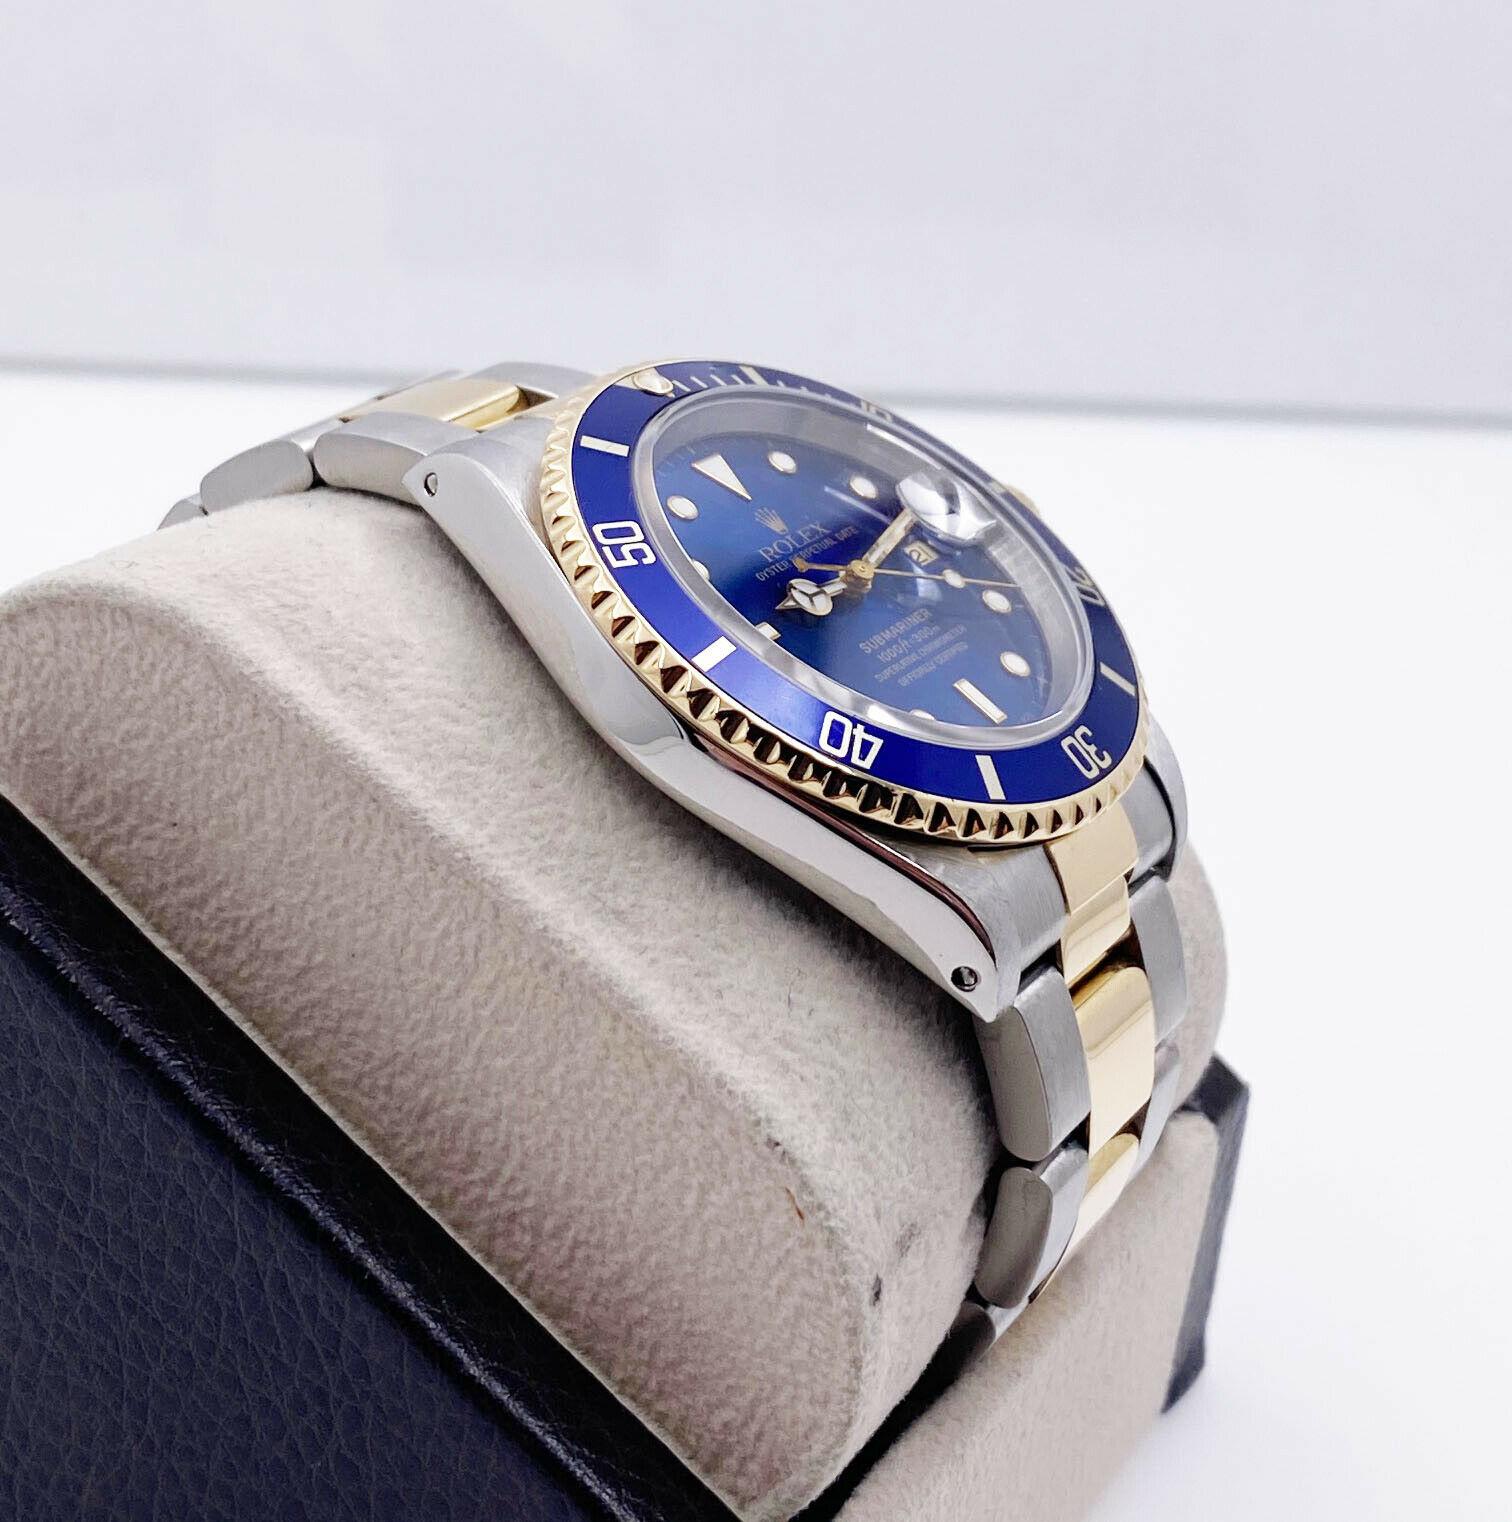 Style Number: 16613

Serial: U107***

Model: Submariner

Case Material: Stainless Steel

Band: 18K Yellow Gold & Stainless Steel

Bezel: Blue

Dial: Blue

Face: Sapphire Crystal

Case Size: 40mm

Includes: 
-Elegant Watch Box
-Certified Appraisal